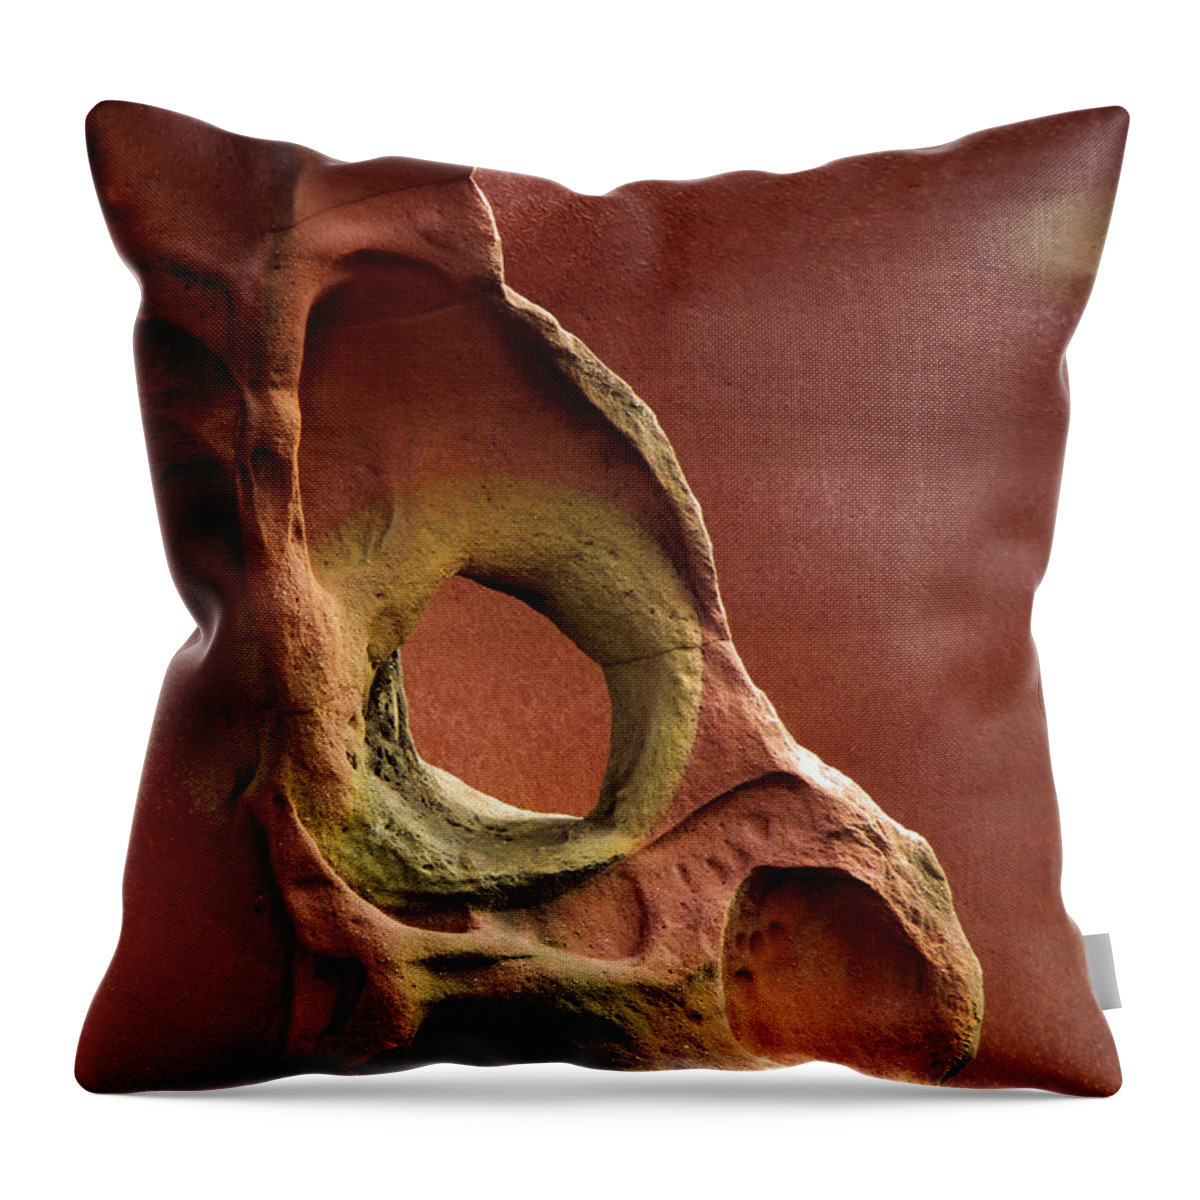 Geology Throw Pillow featuring the photograph Sinister Forms by By Mediotuerto